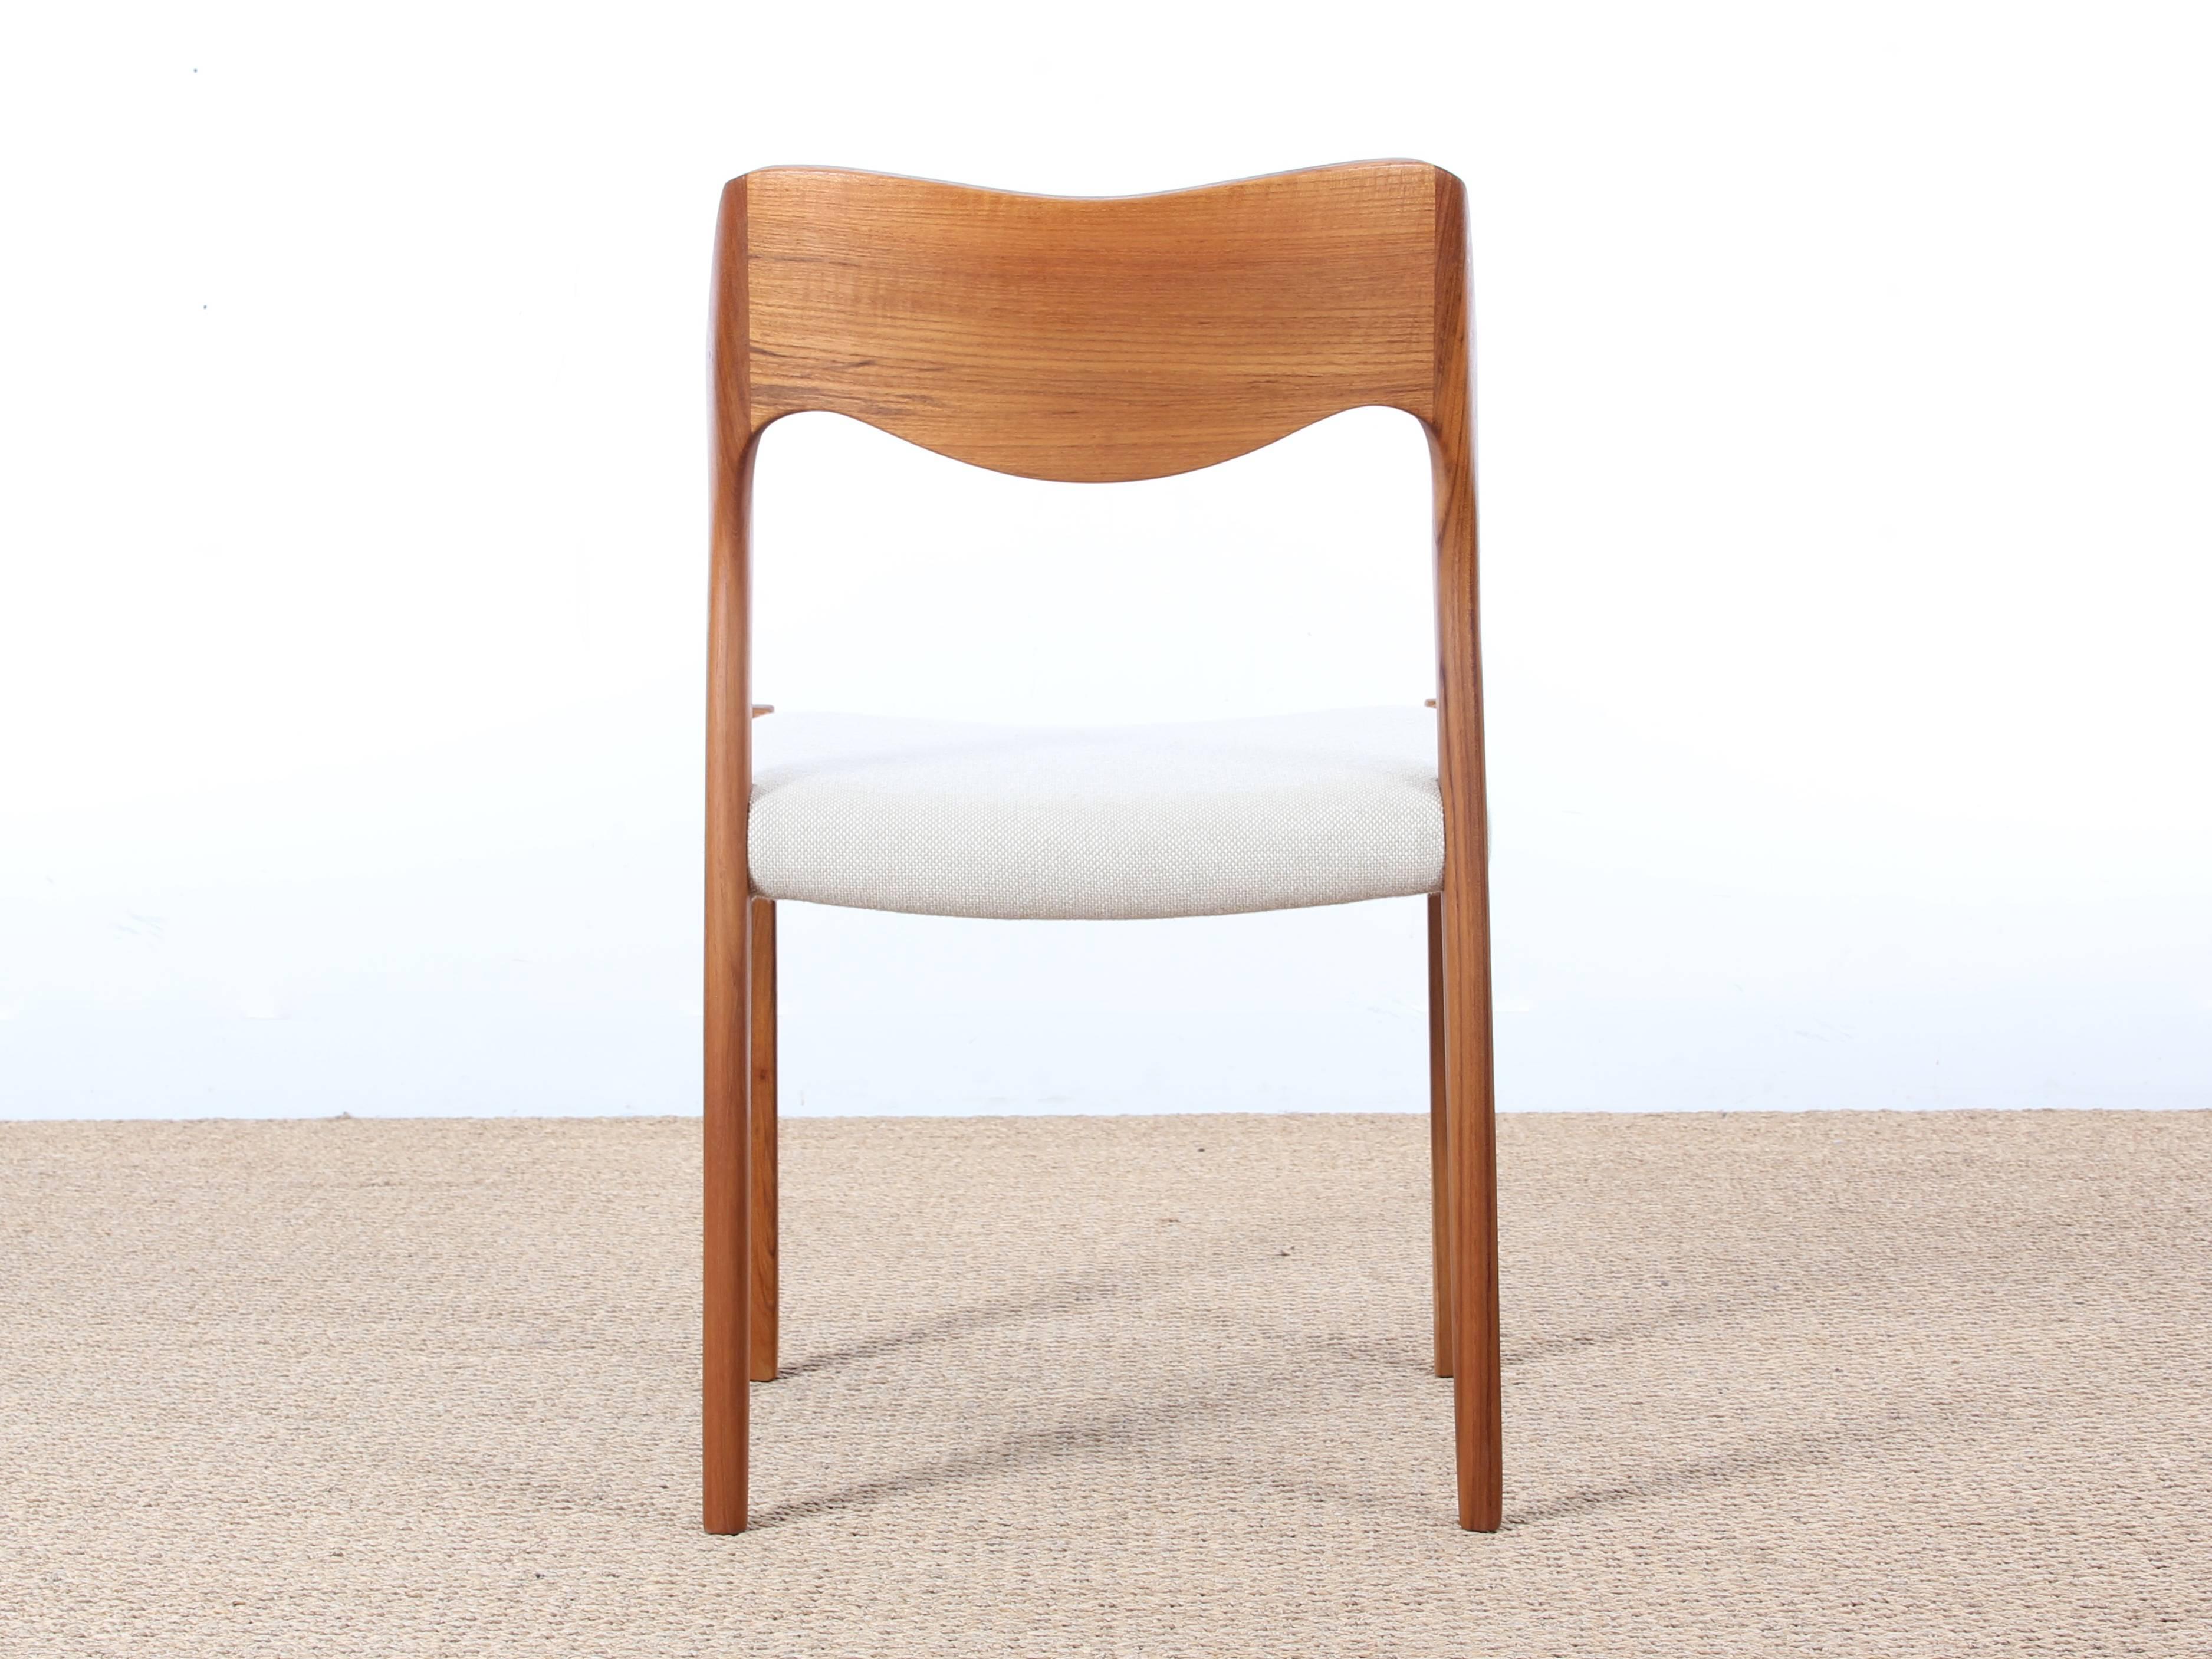 Mid-Century Modern Danish chair in teak model 71 by Niels O. Møller. Frame in solid teak, seat in Kvadrat Hallingdal fabric, available on demand in 65 colors. New production, still handmade in the historical Møllers workshop in Denmark. 

On